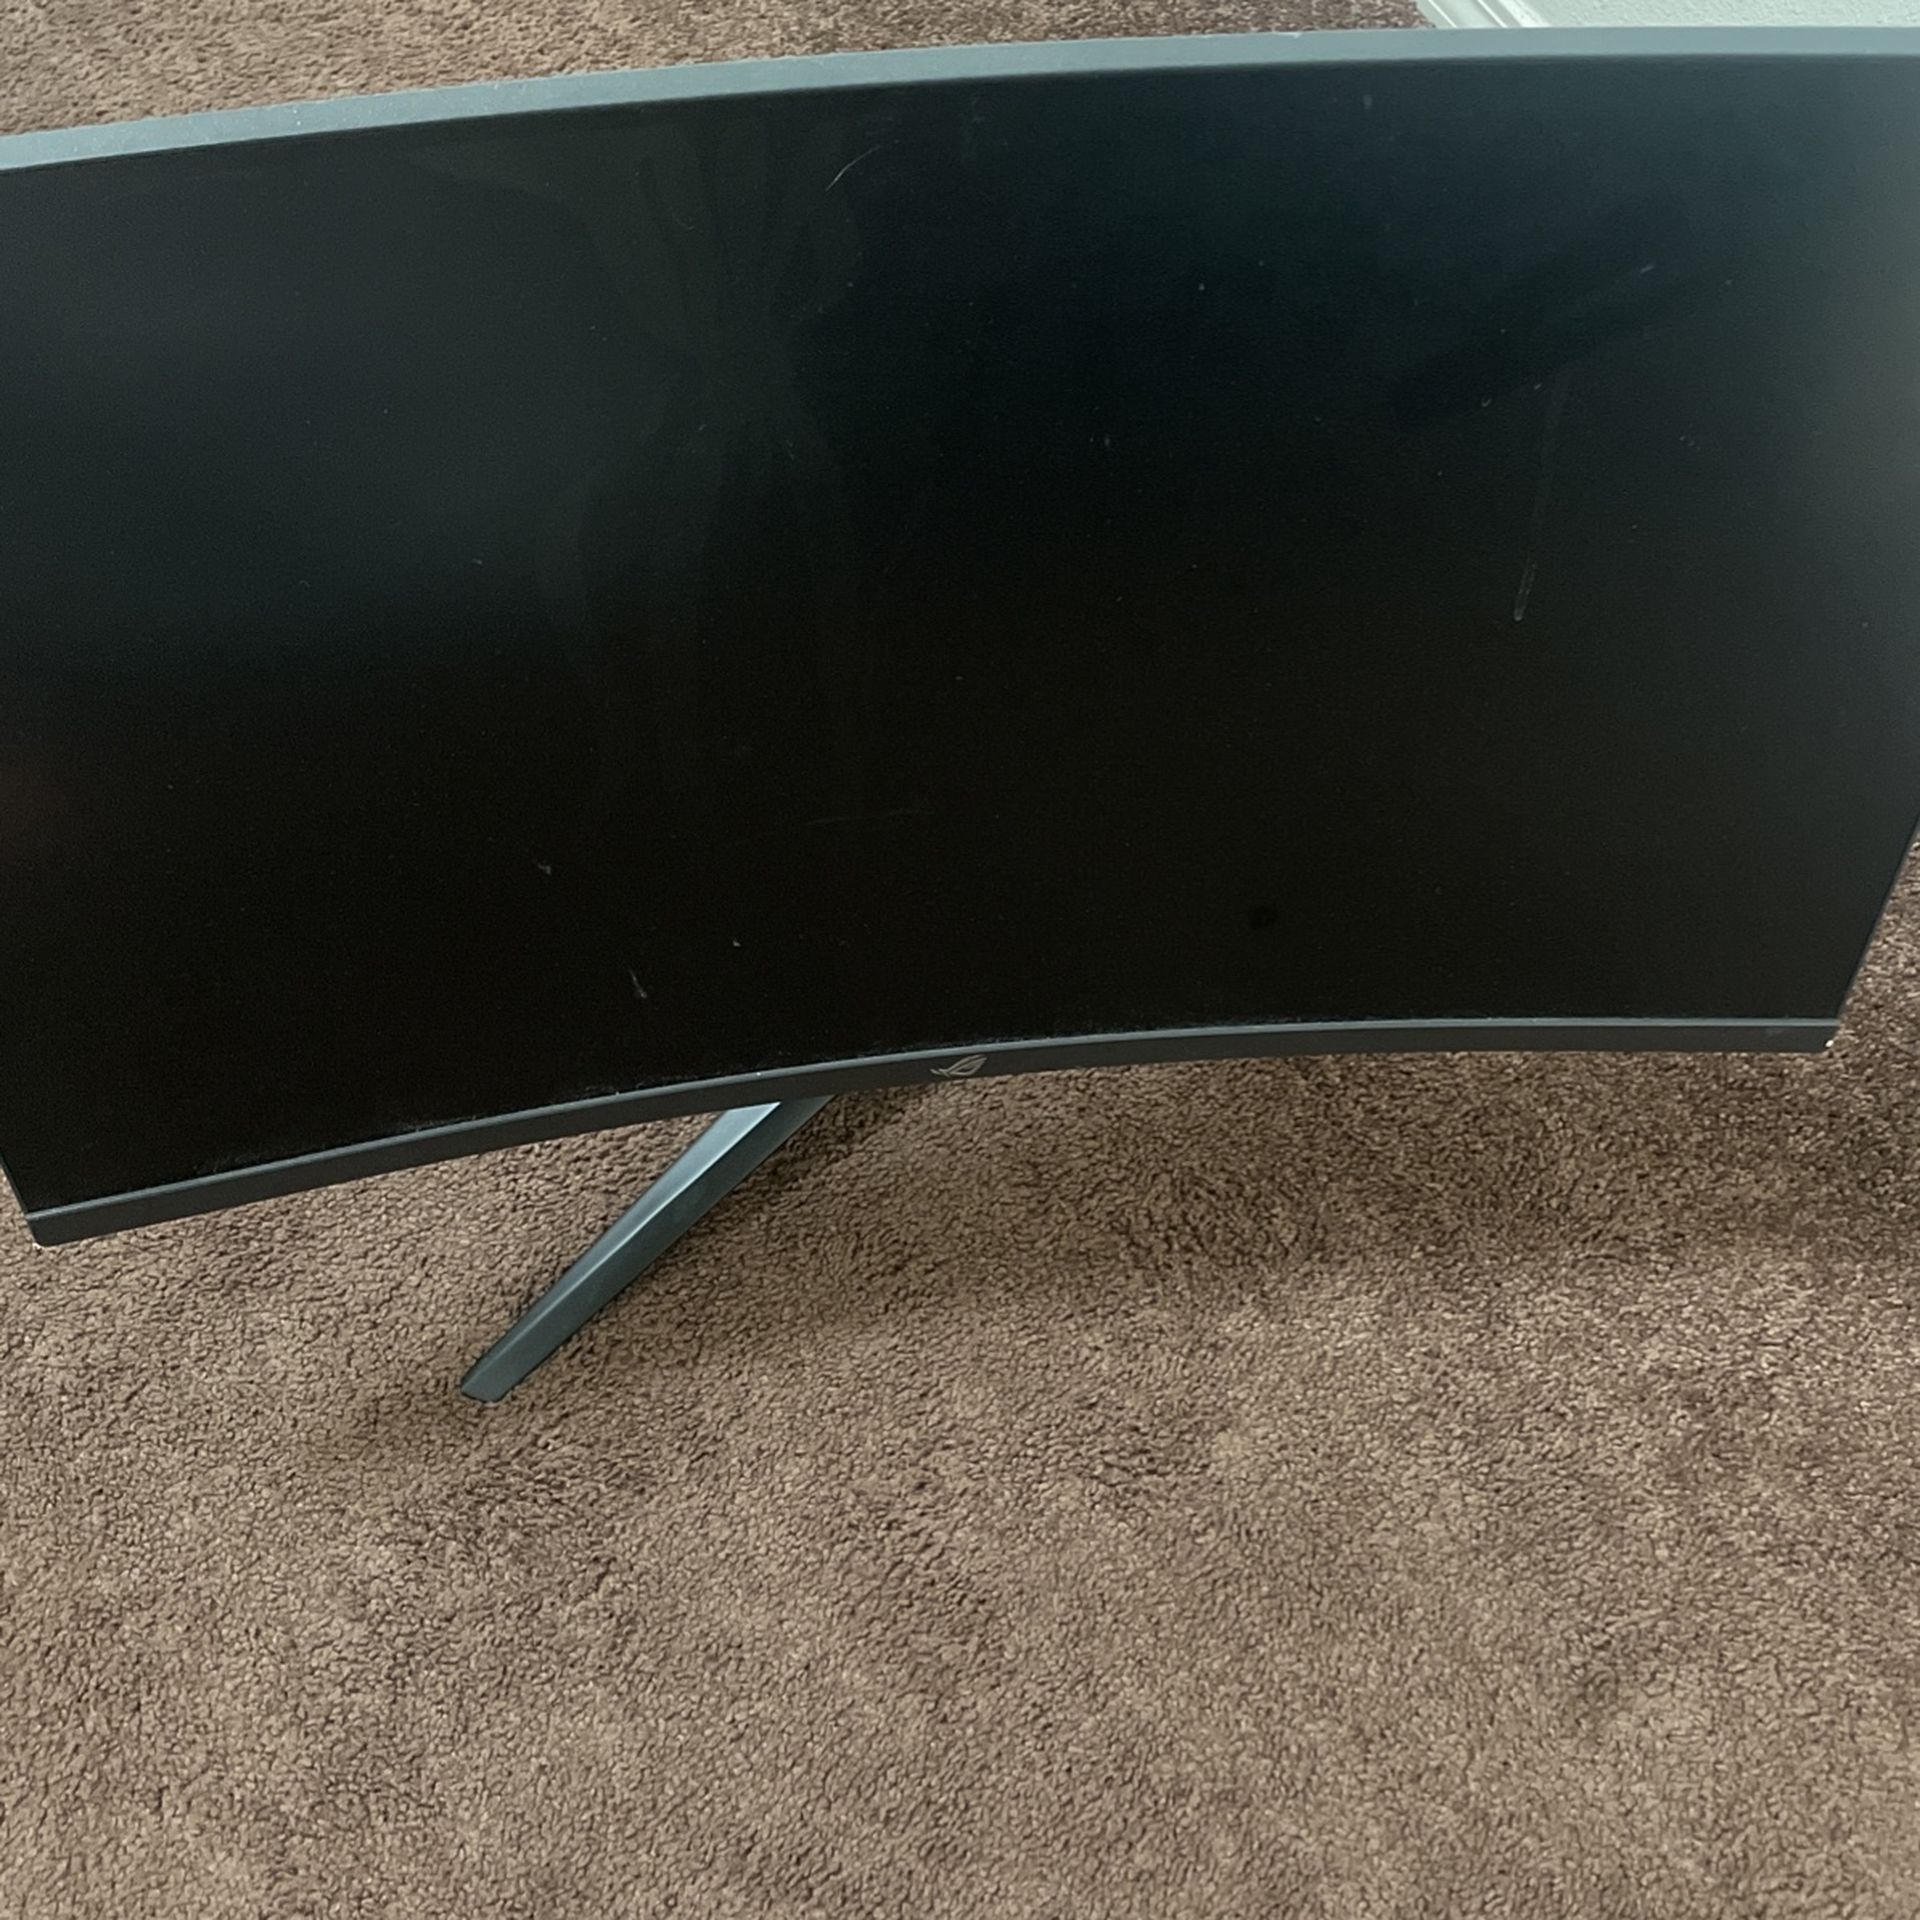 Asus Curved Monitor 